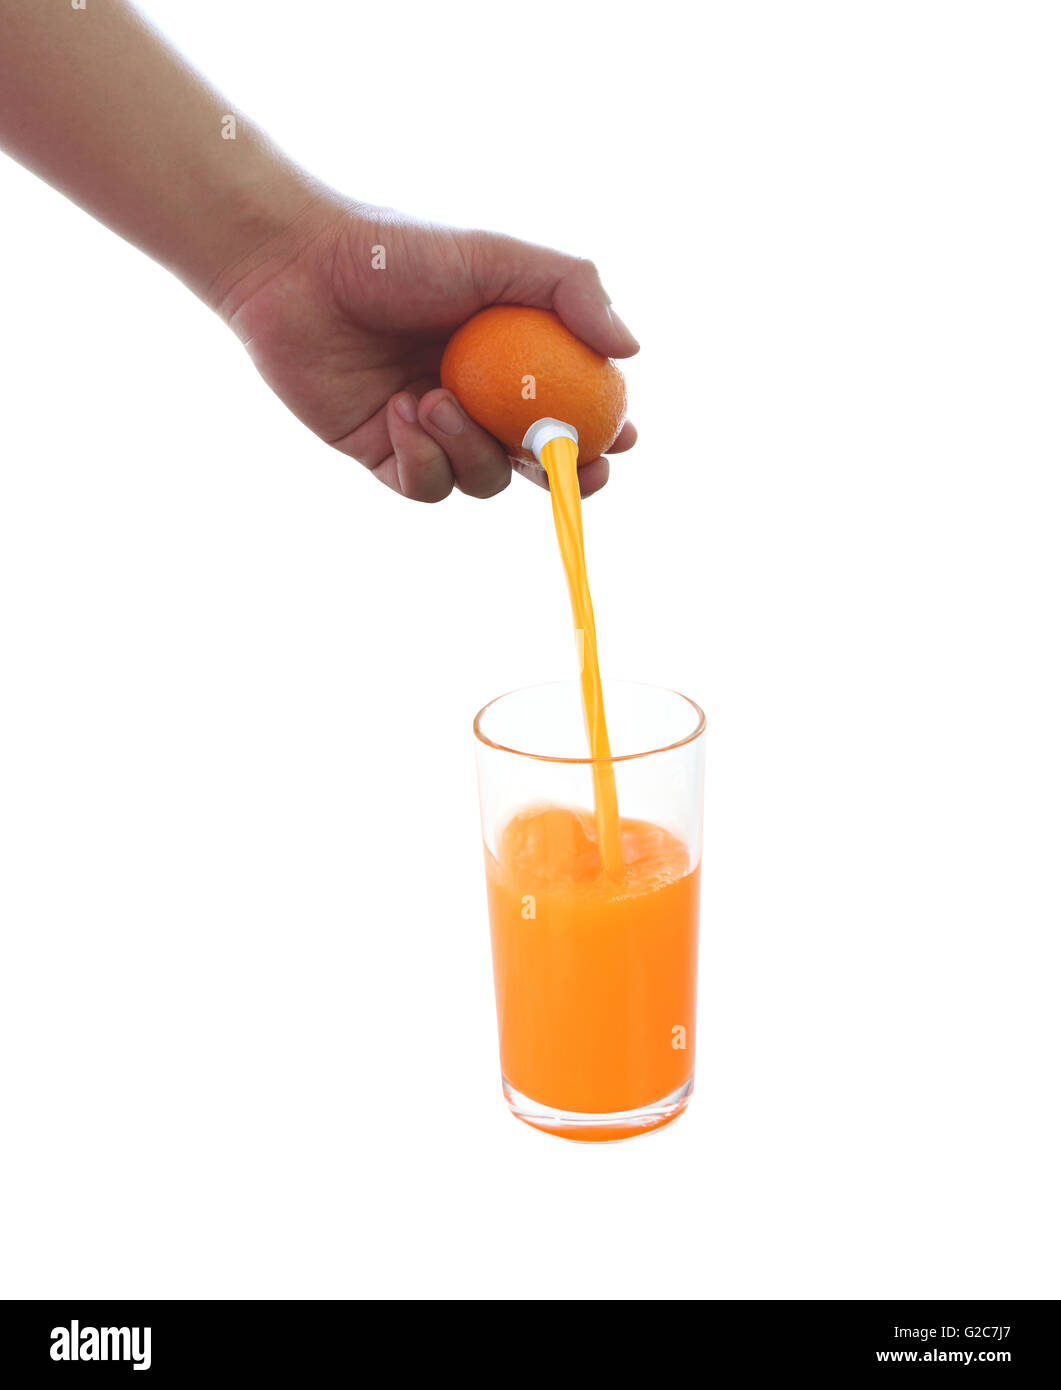 fresh orange in hand and have fruit juice flowing into a glass on white background for concept of healthy eating. Stock Photo